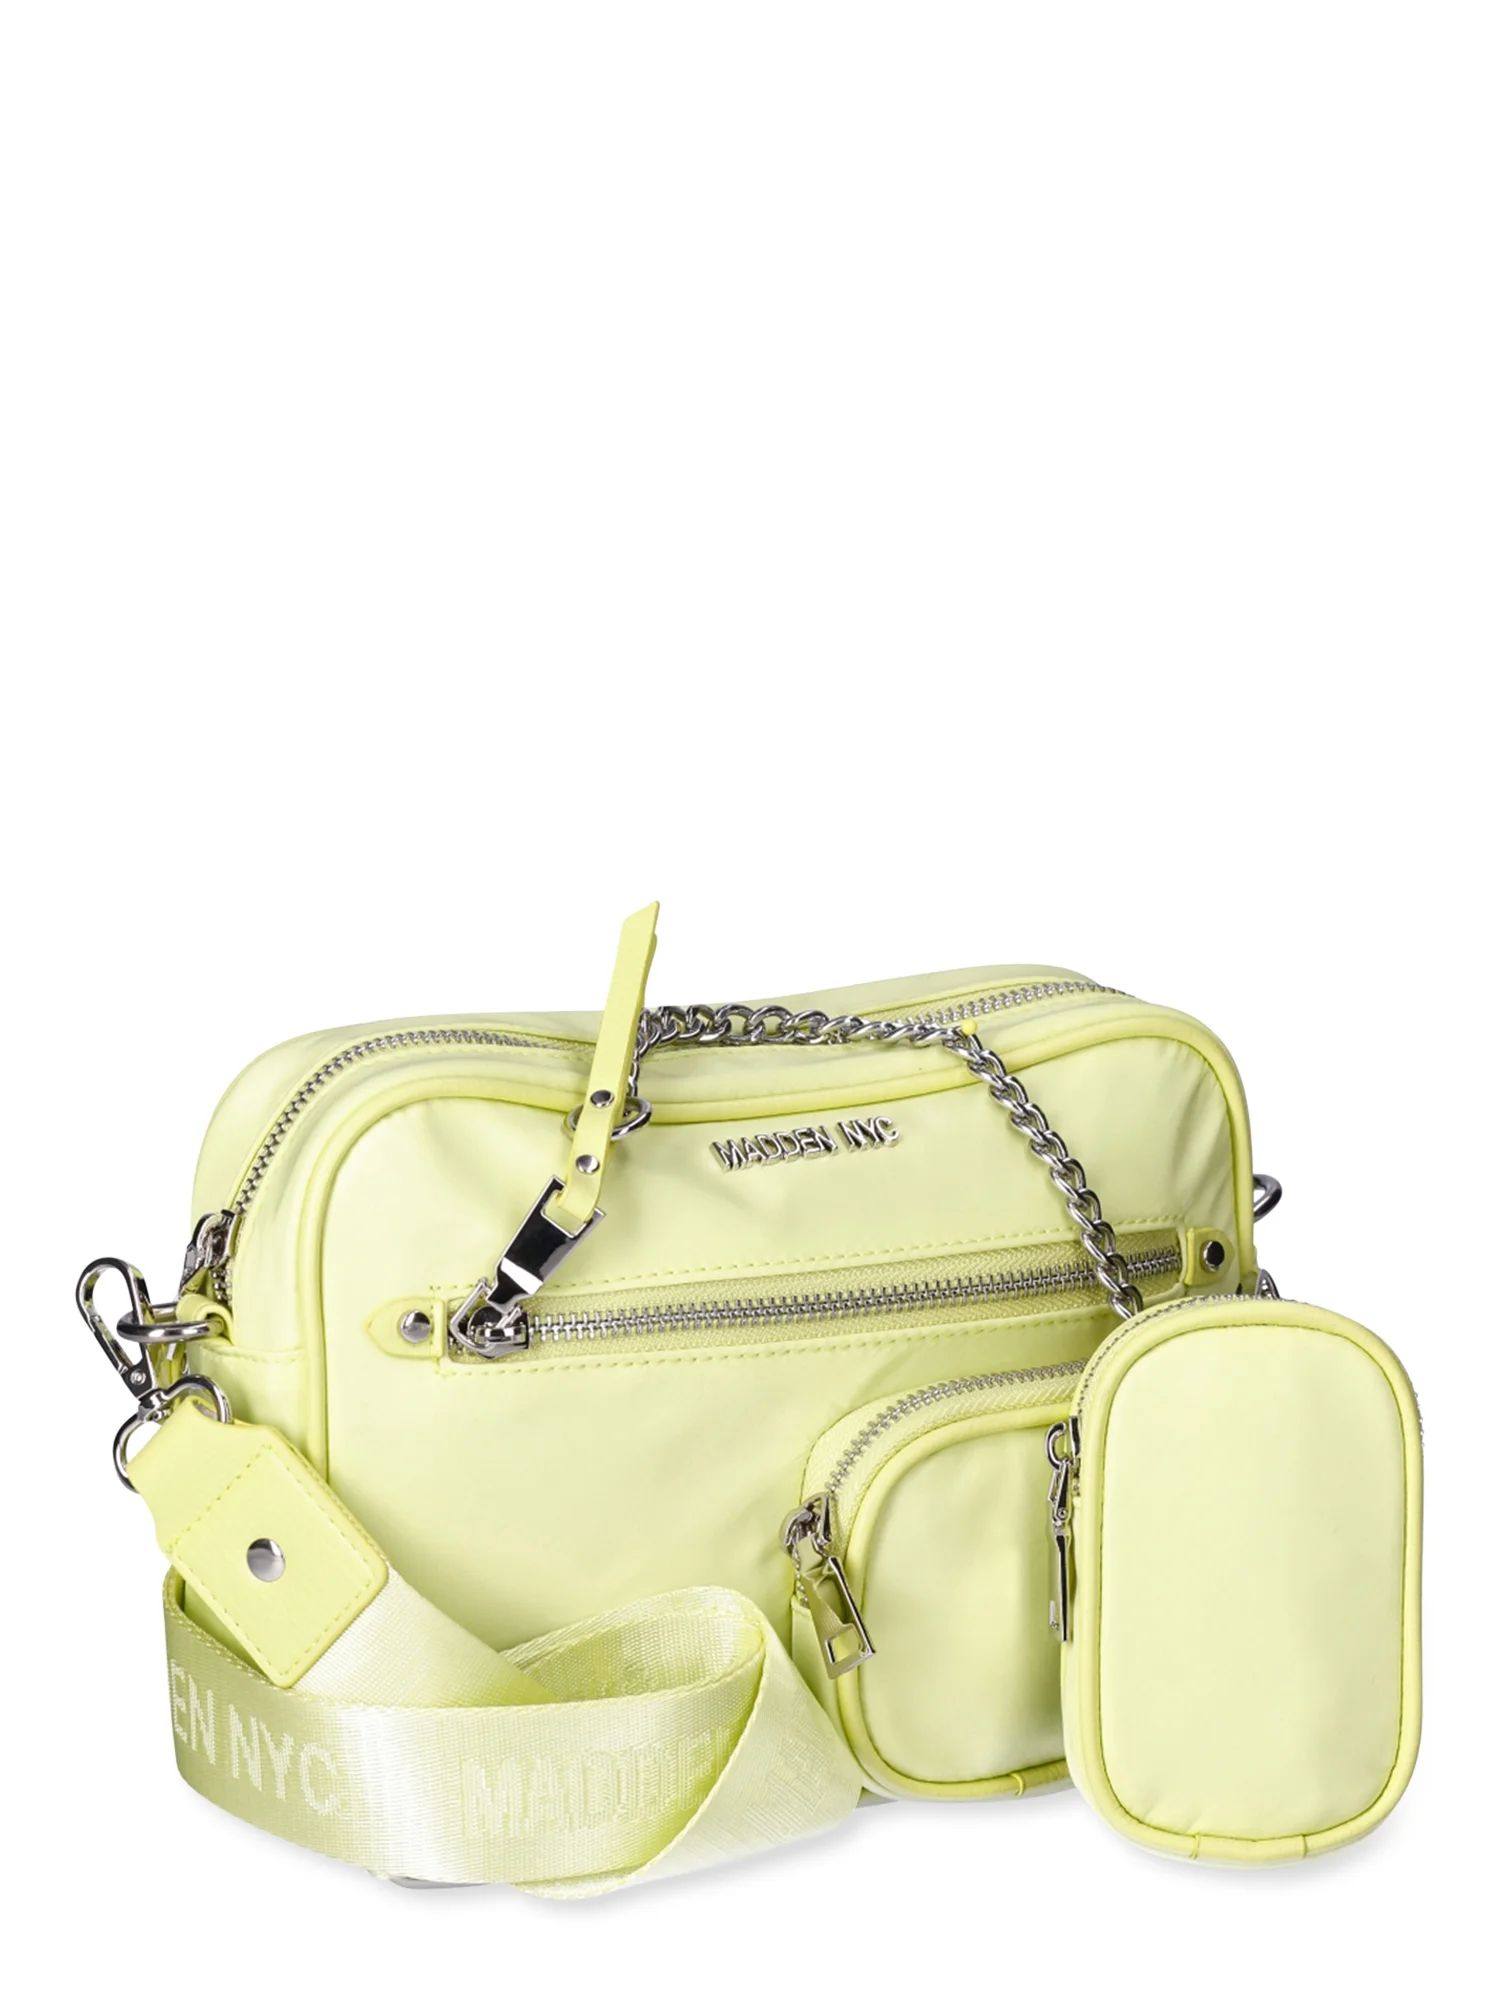 Madden NYC Women's Camera Crossbody Bag with Pouch, Lime | Walmart (US)